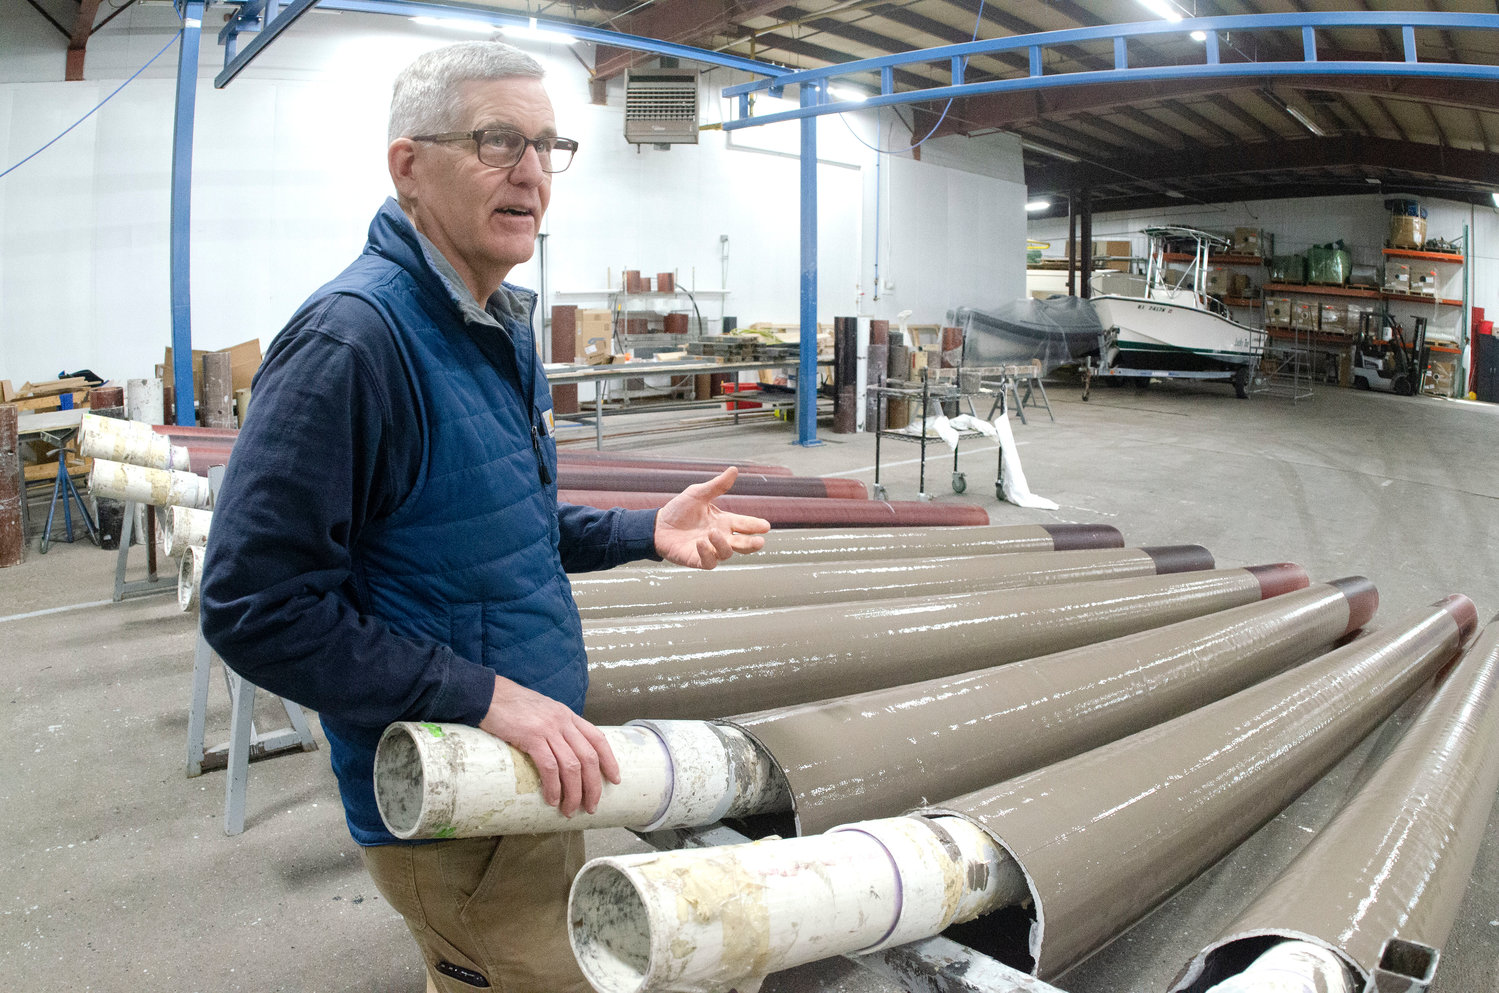 Company president Mark Pearson talks about how they manufacture and paint this series of pilings inside their Somerset facility.